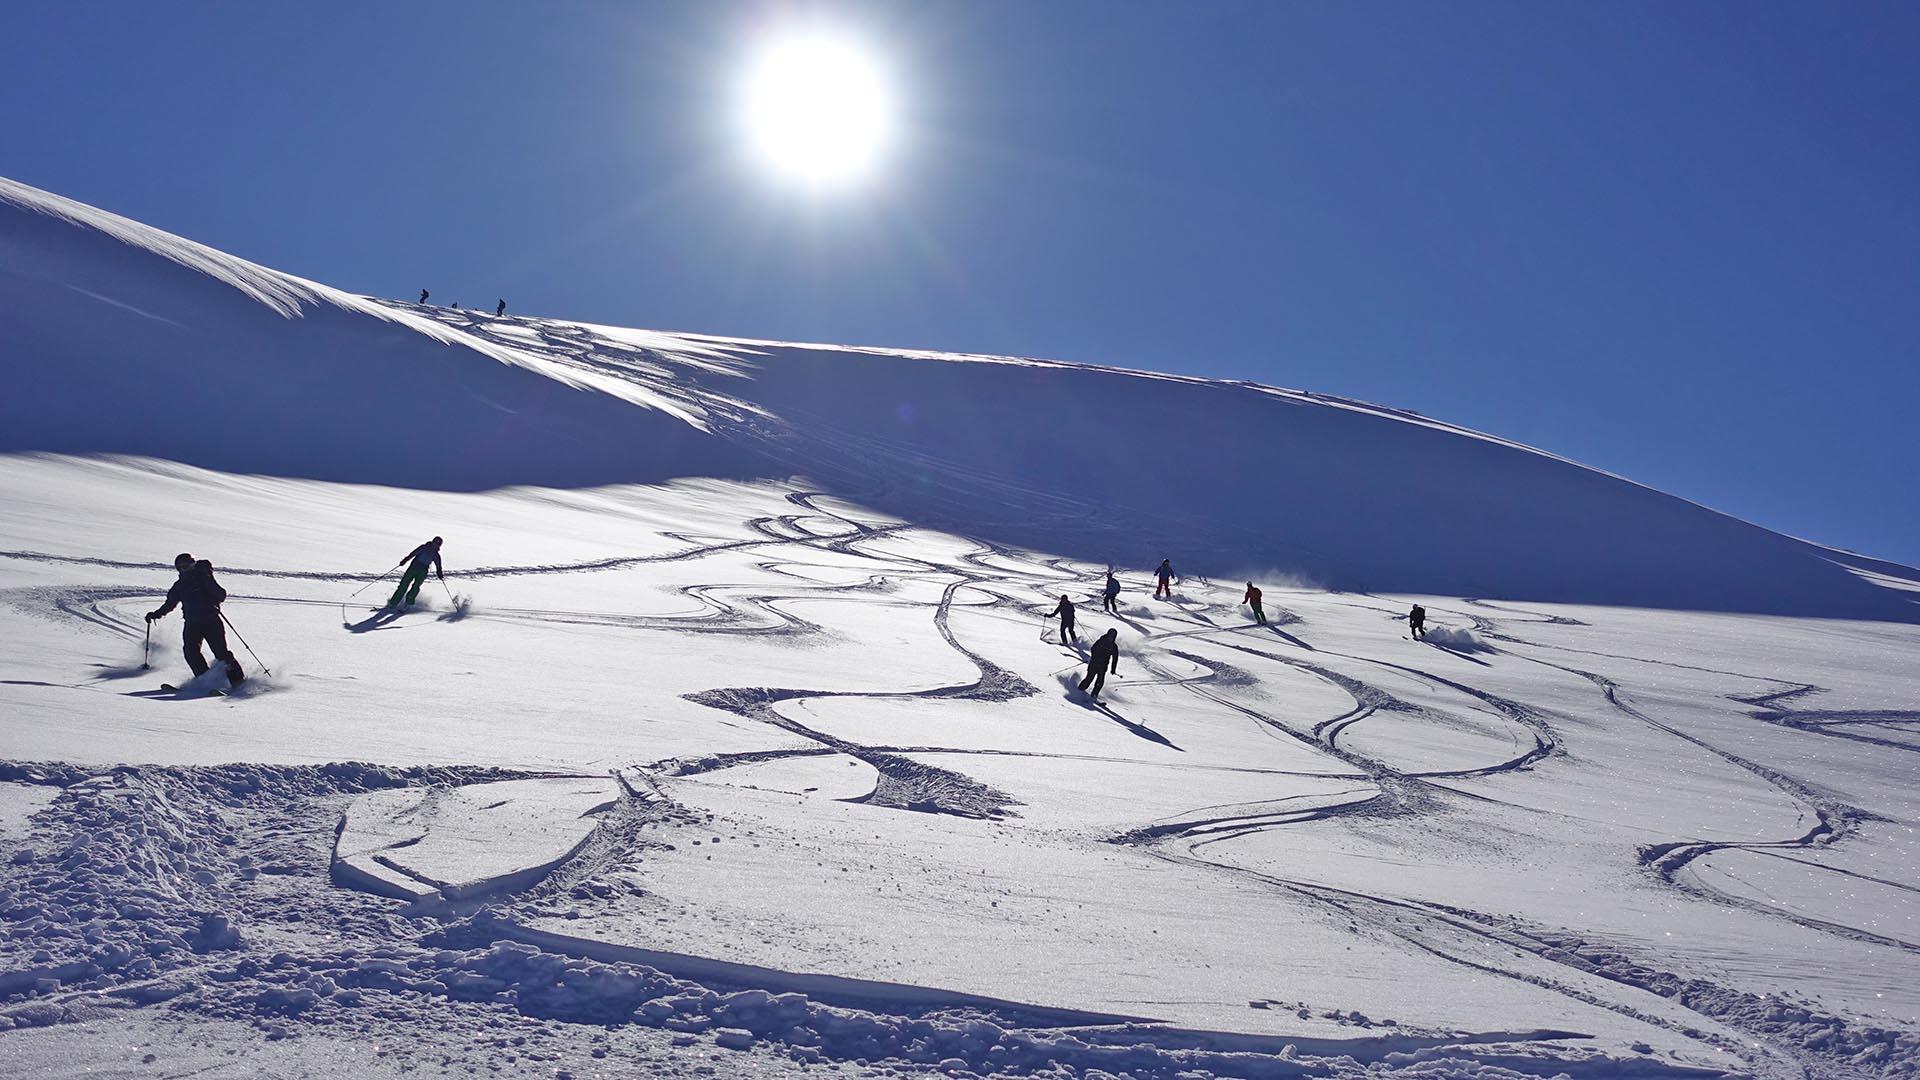 Group of 8 people on their way down the mountain on randonee skis with the sun and a blue sky behind them.